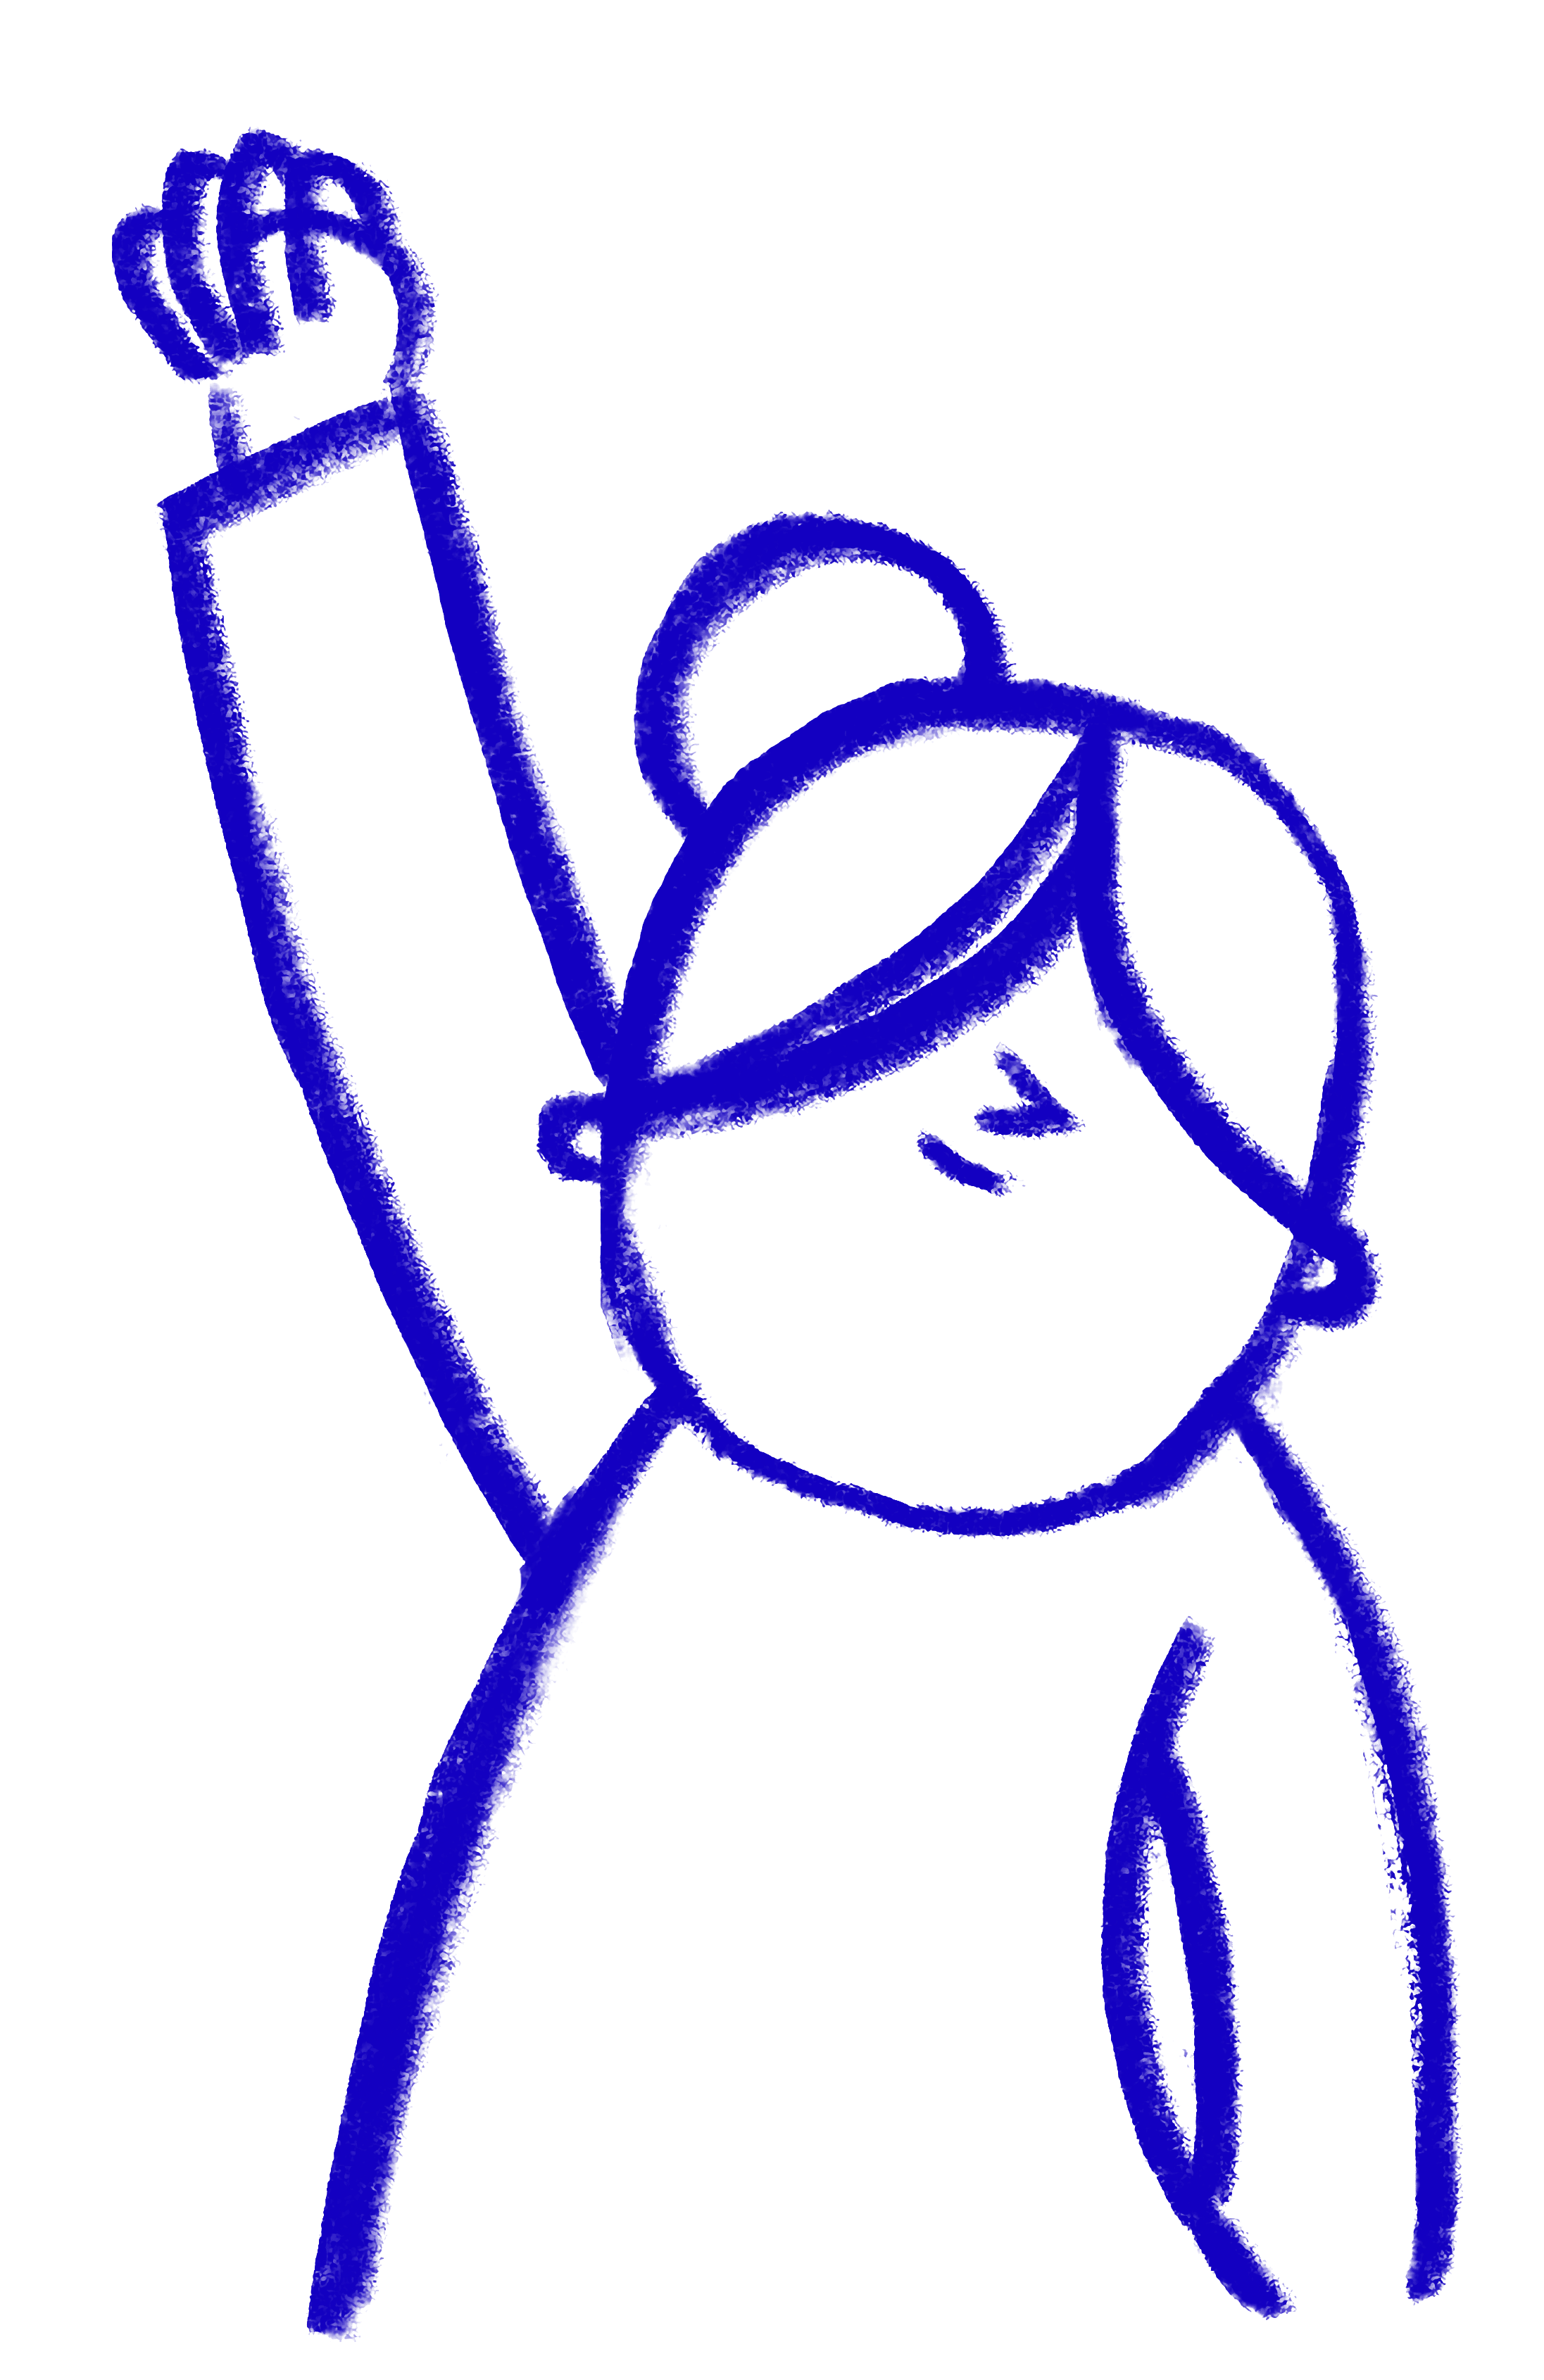 Fist In Air Illustration in Blue 